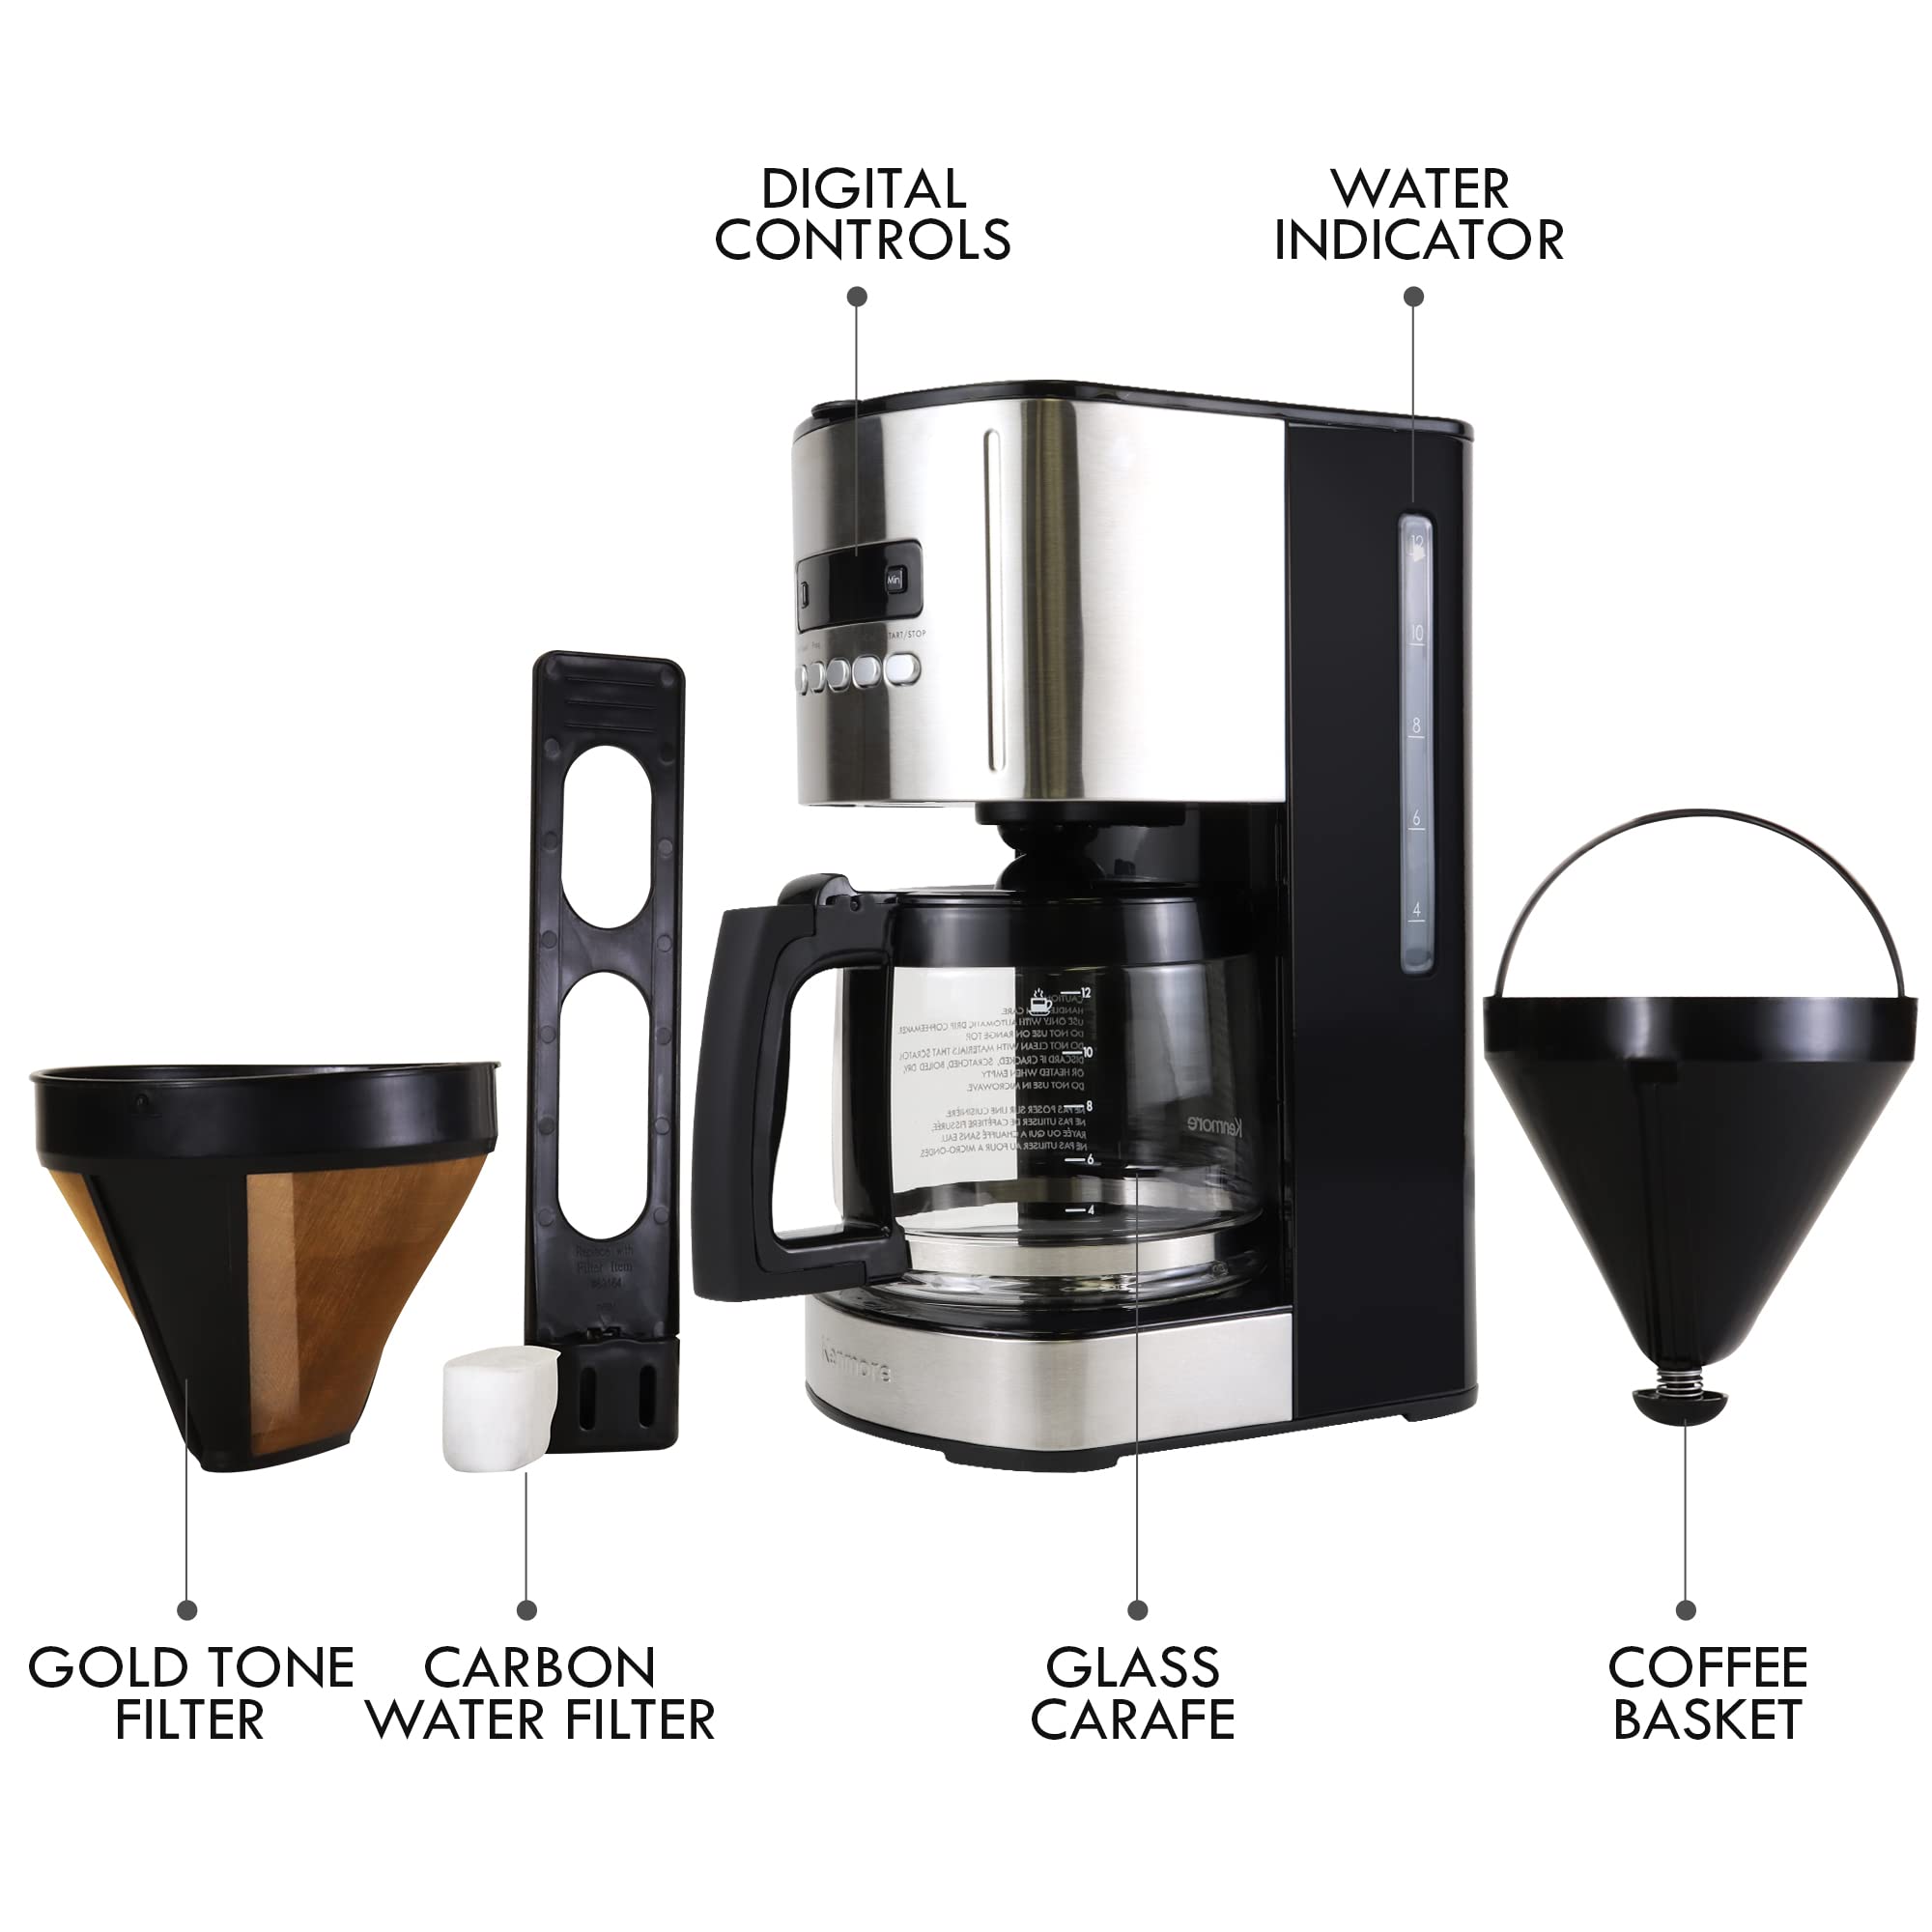 Kenmore Aroma Control Programmable 12-cup Coffee Maker, Stainless Steel/Black with Glass Carafe, LCD Display, Reusable Cone Filter, and Charcoal Water Filter